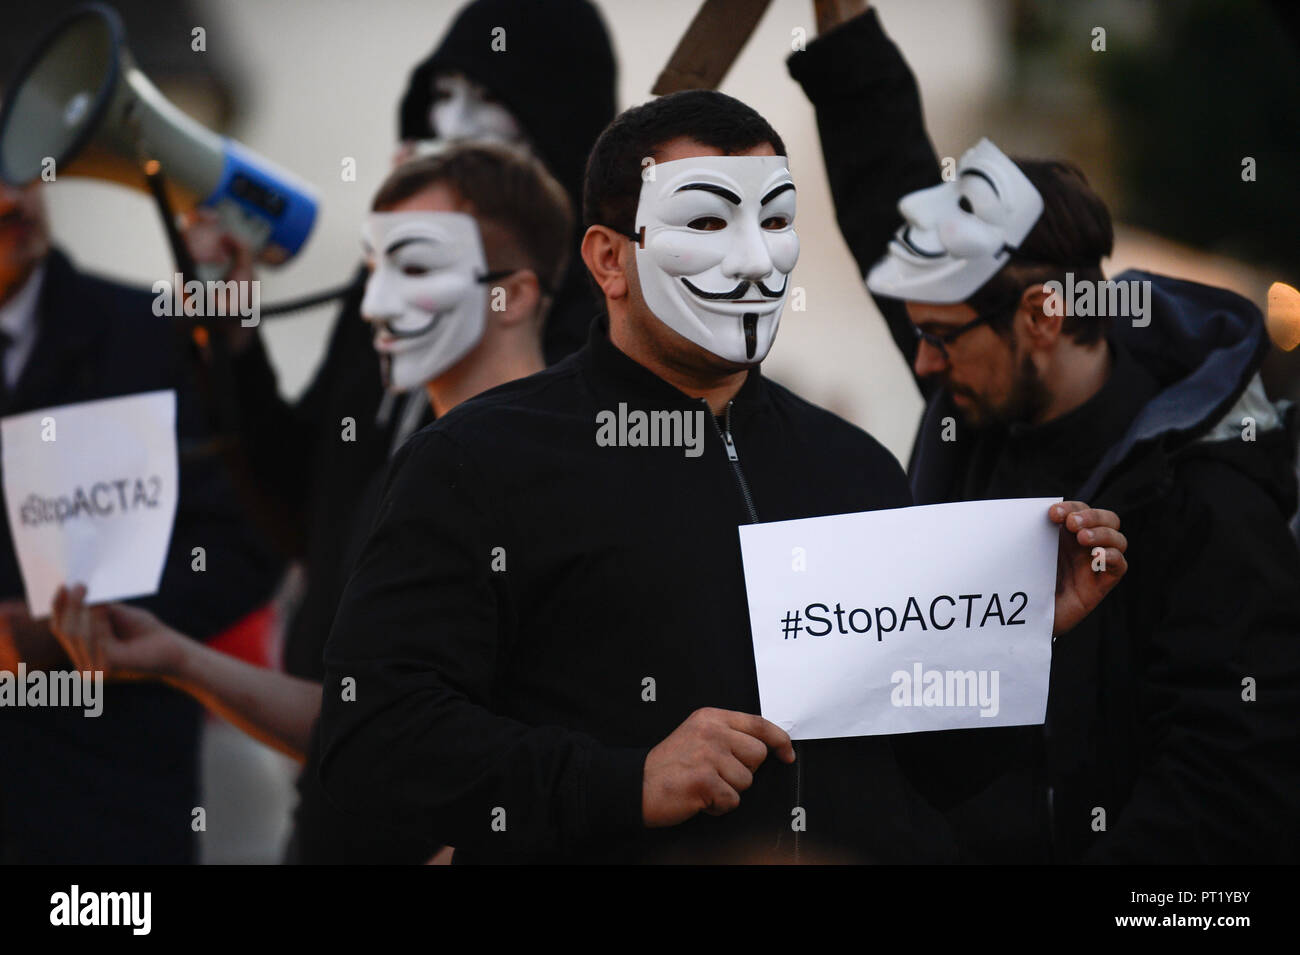 Krakow, Poland. 5th Oct, 2018. Protesters with Guy Fawkes masks seen with posters taking part in the demonstration.Protest against the implemented EU Copyright Directive (known as ACTA 2.0) in front of Adam Mickiewicz Monument at the Main Square.Fa Credit: ZUMA Press, Inc./Alamy Live News Stock Photo